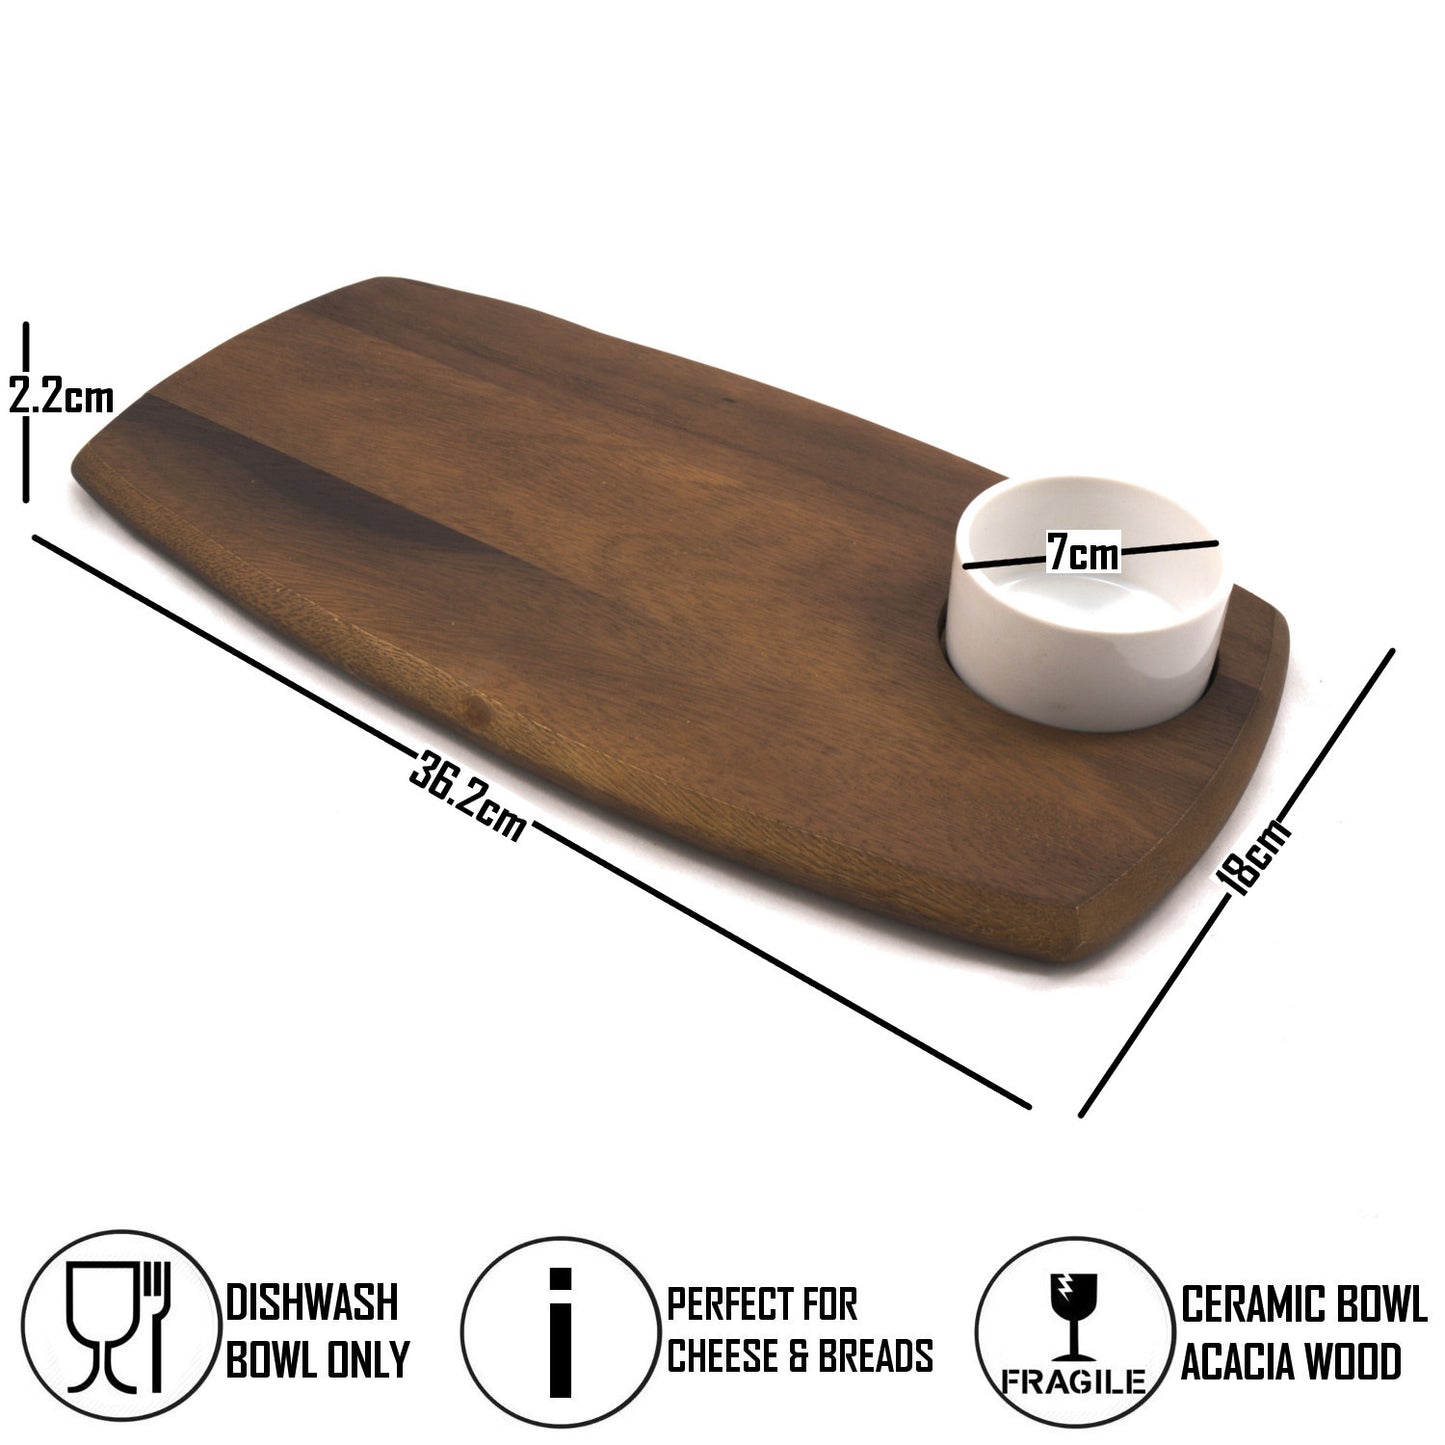 Chef-Hub Wooden Serving Board With Dip Bowl - Narrow